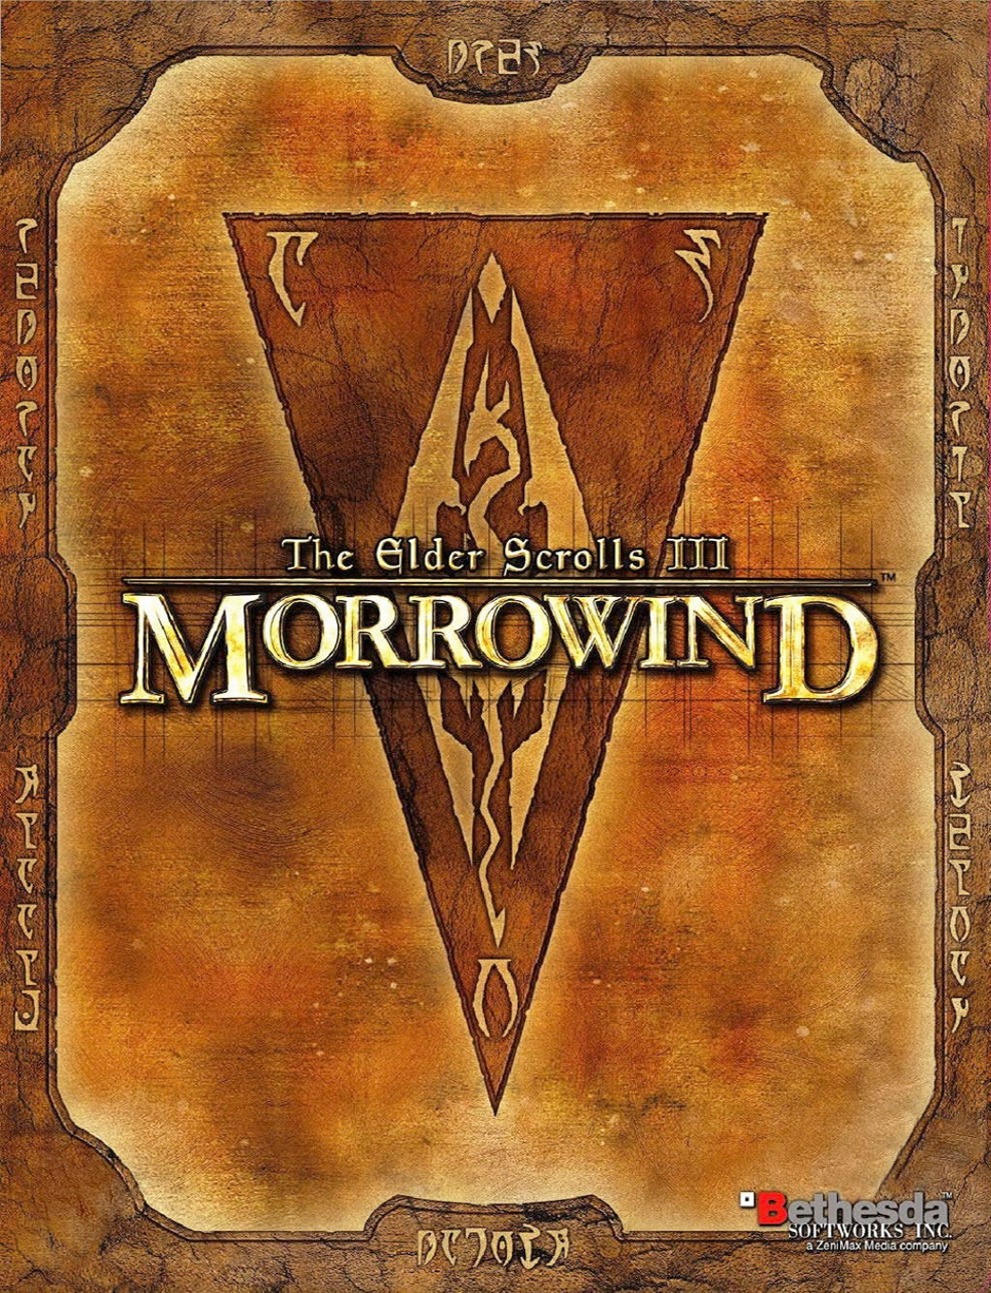 chip-ragsdale-the-video-game-morrowind